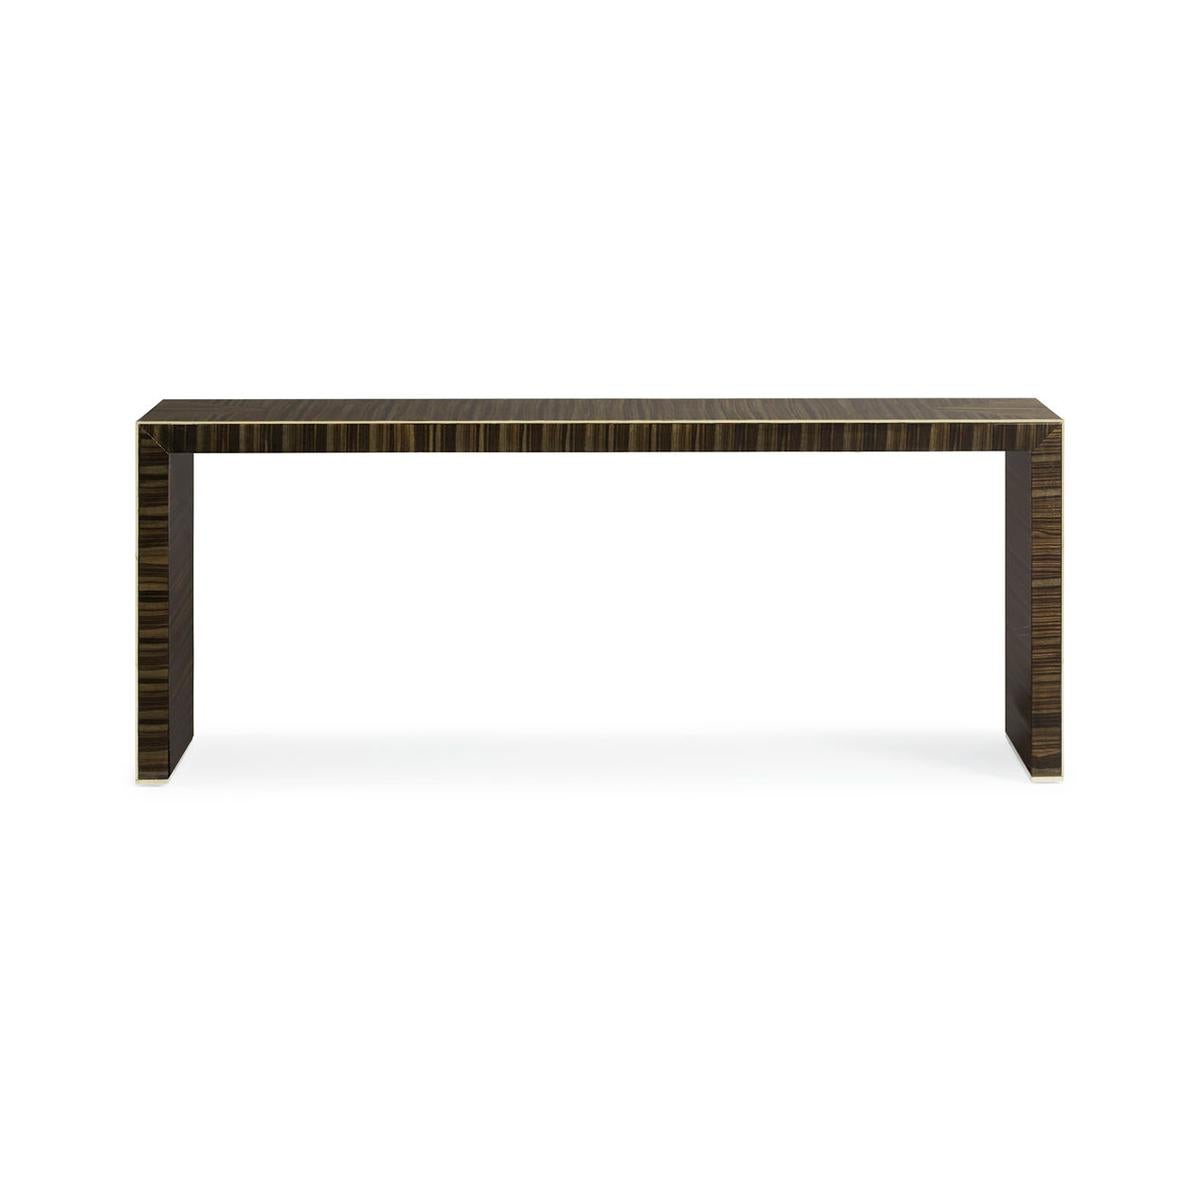 An exotic Striped Ebony veneer is on full display on this modern console. A crisp tailored miter shows off the dramatic veneer on each end panel. A thin, gold metal bead surrounds the entire profile to allow the perfect hint of sparkle.

The